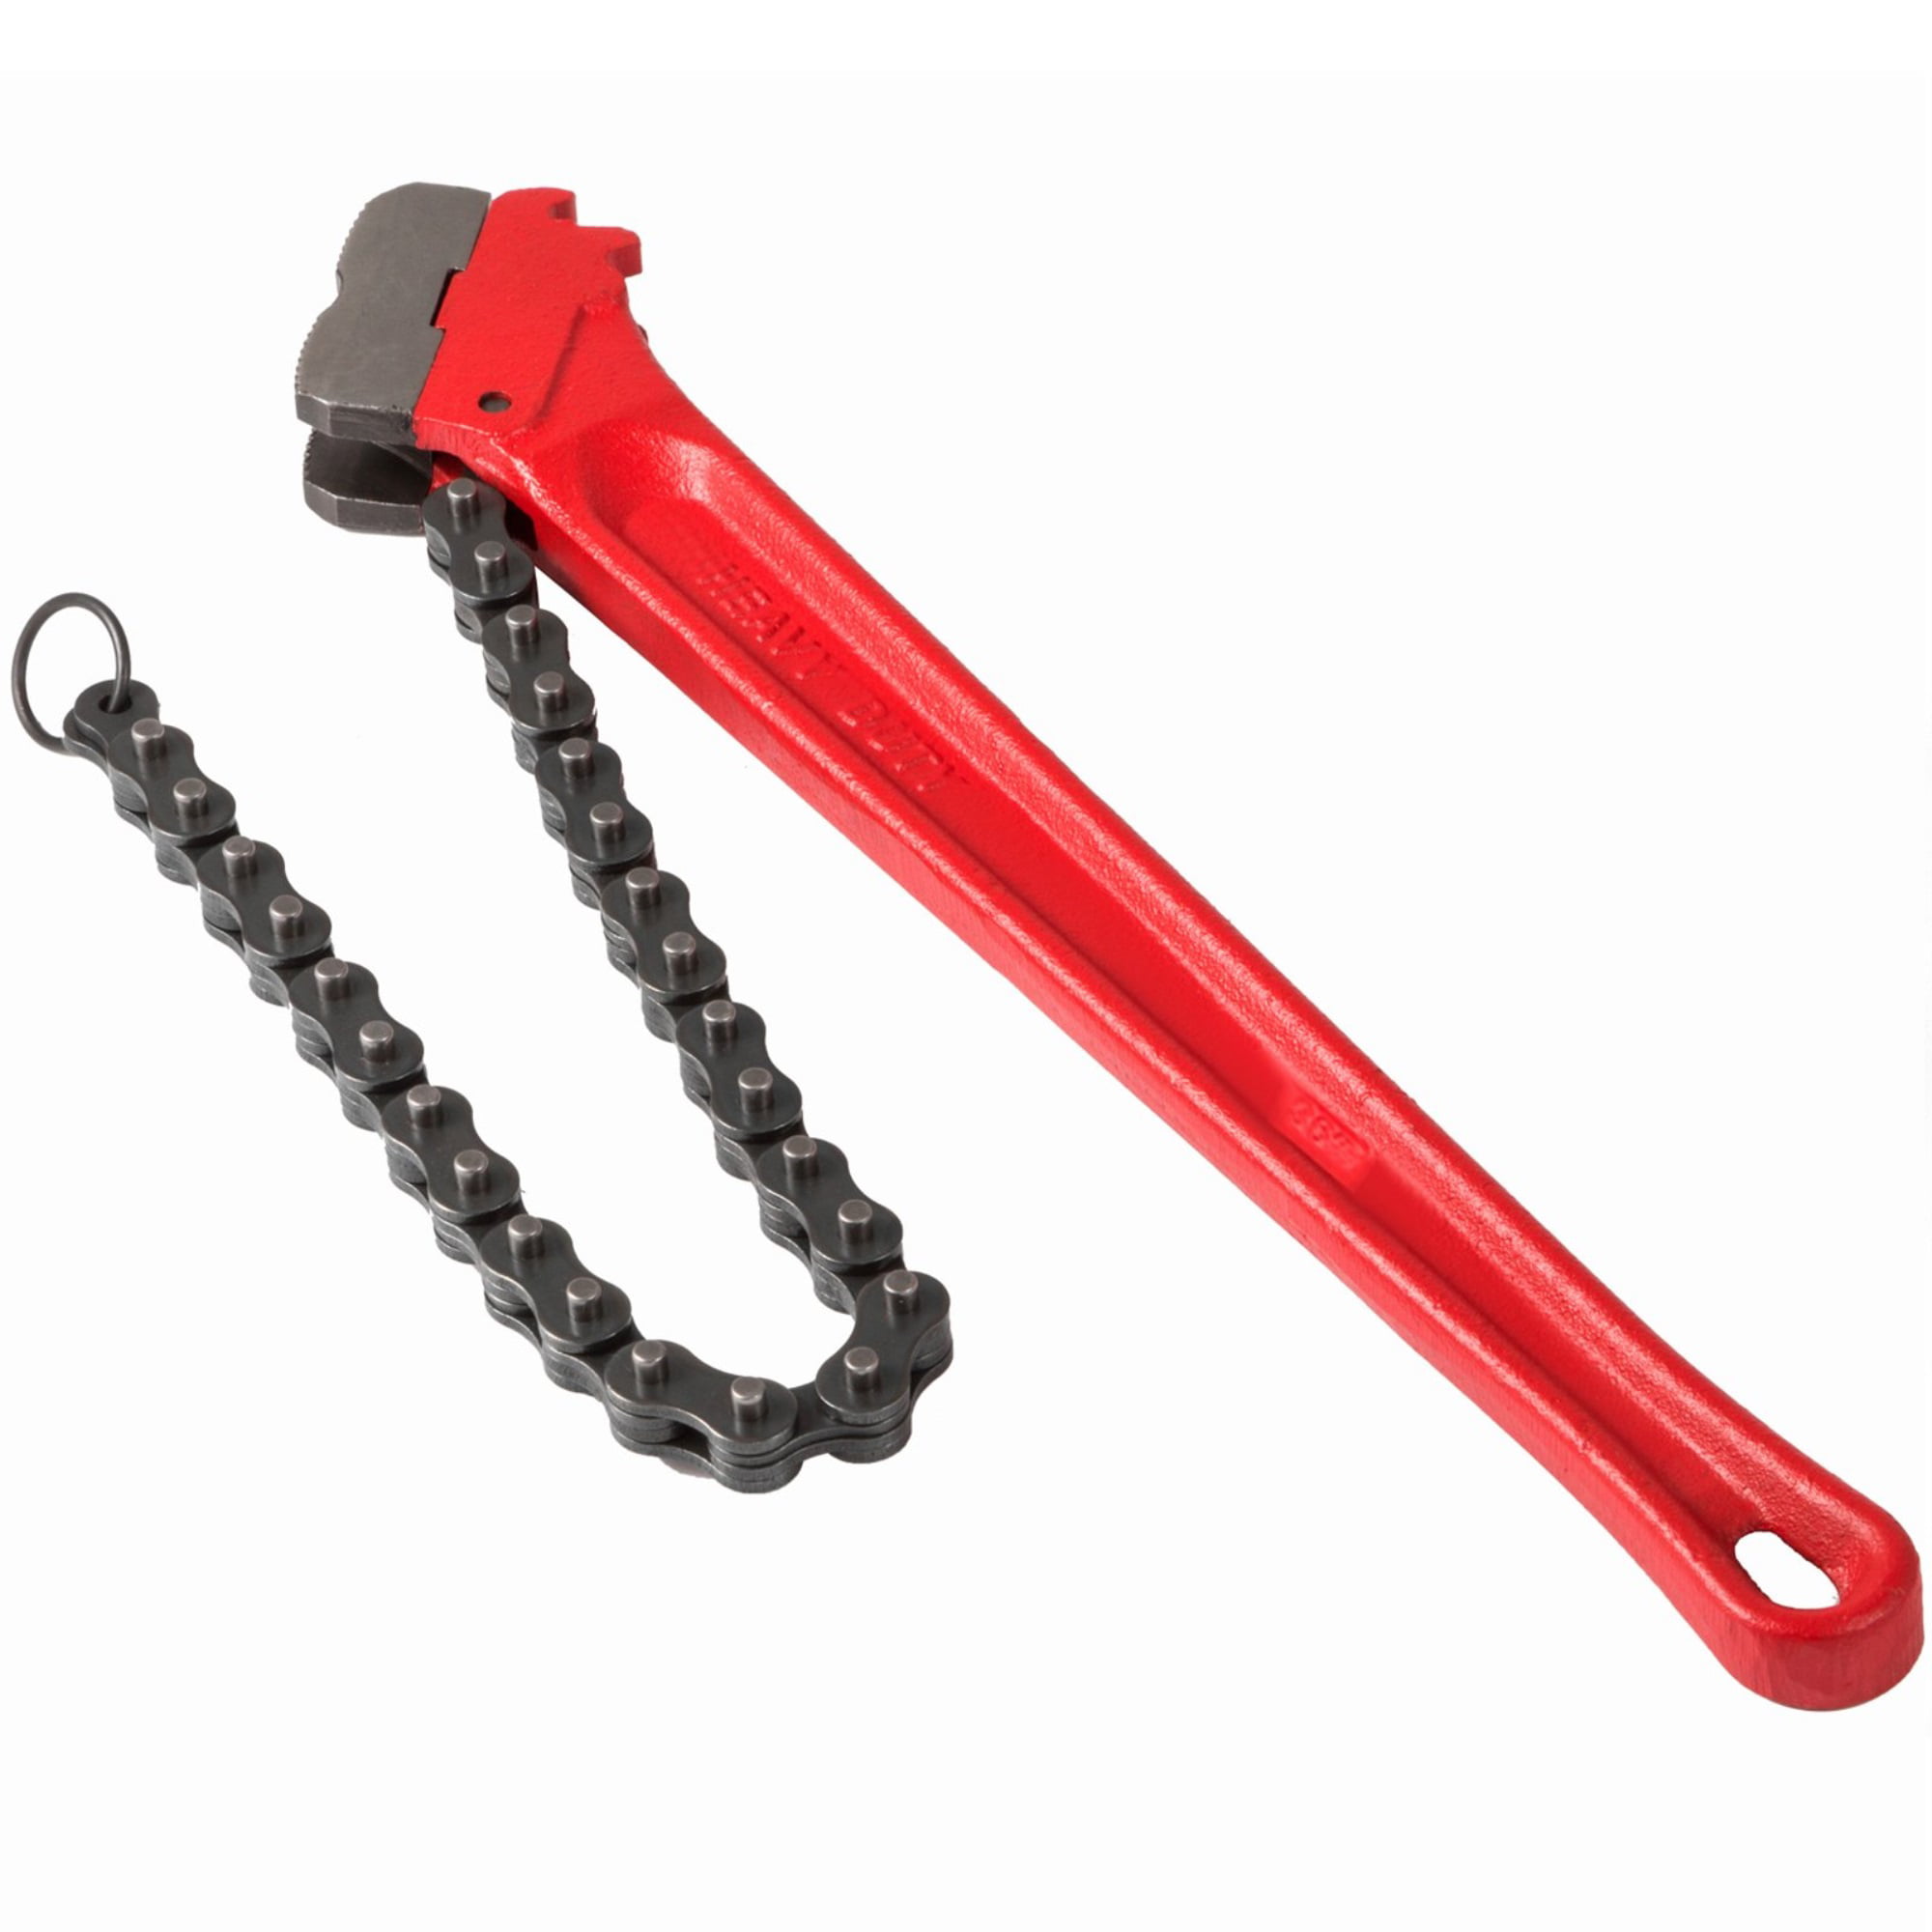 Pipe Wrench Ratchet Chain Wrench 36 in Handle with 30" Chain up to 7.5" Pipe 